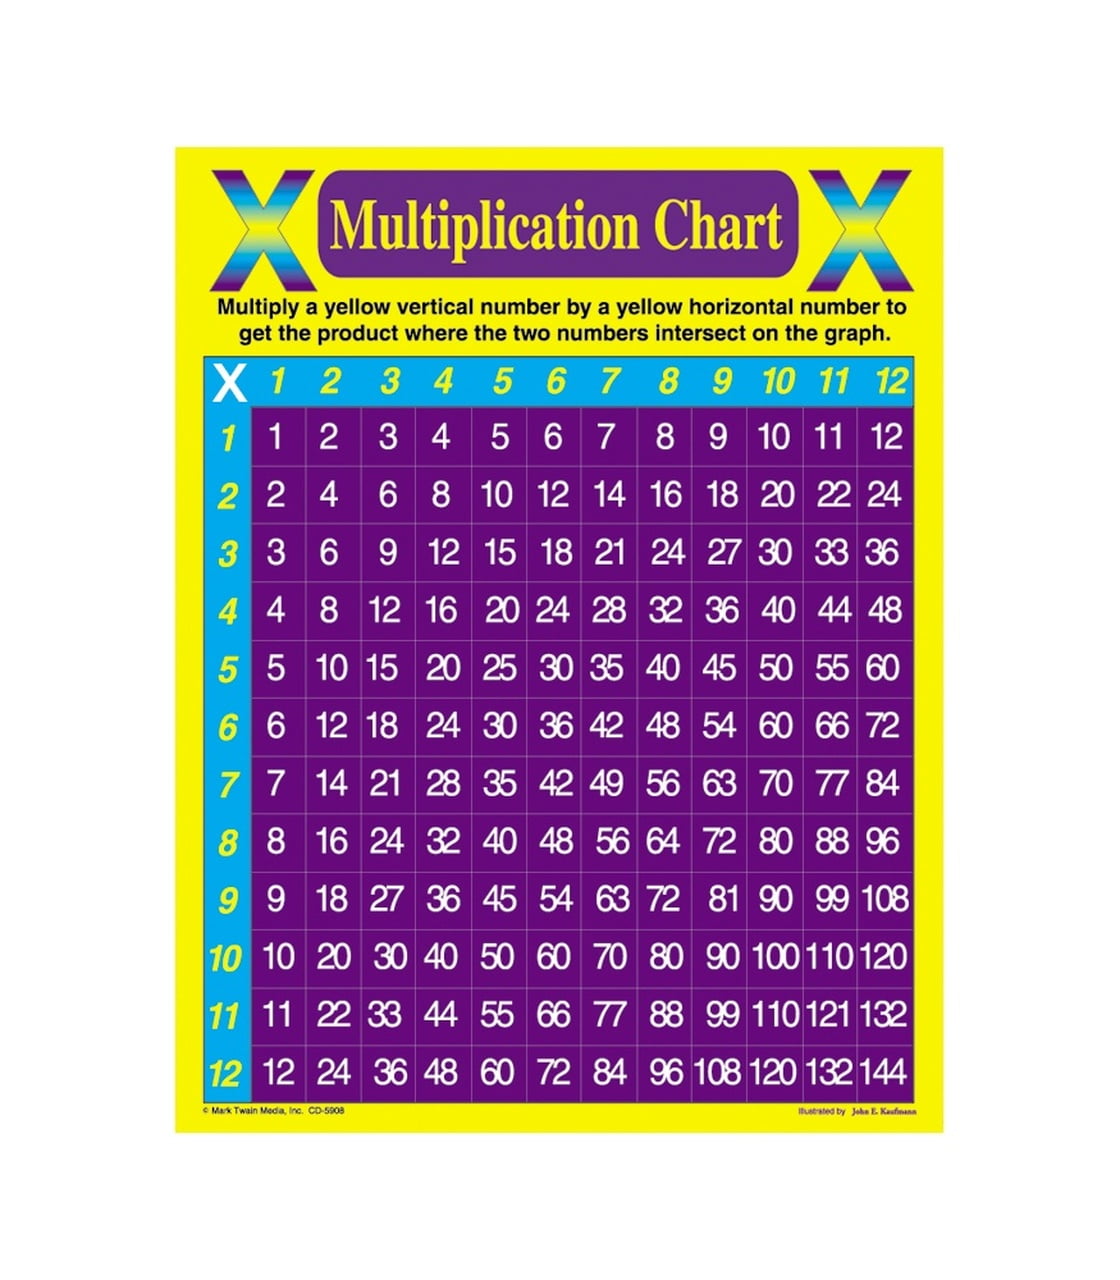 4-multiplication-chart-multiplication-table-chart-multiplying-by-4